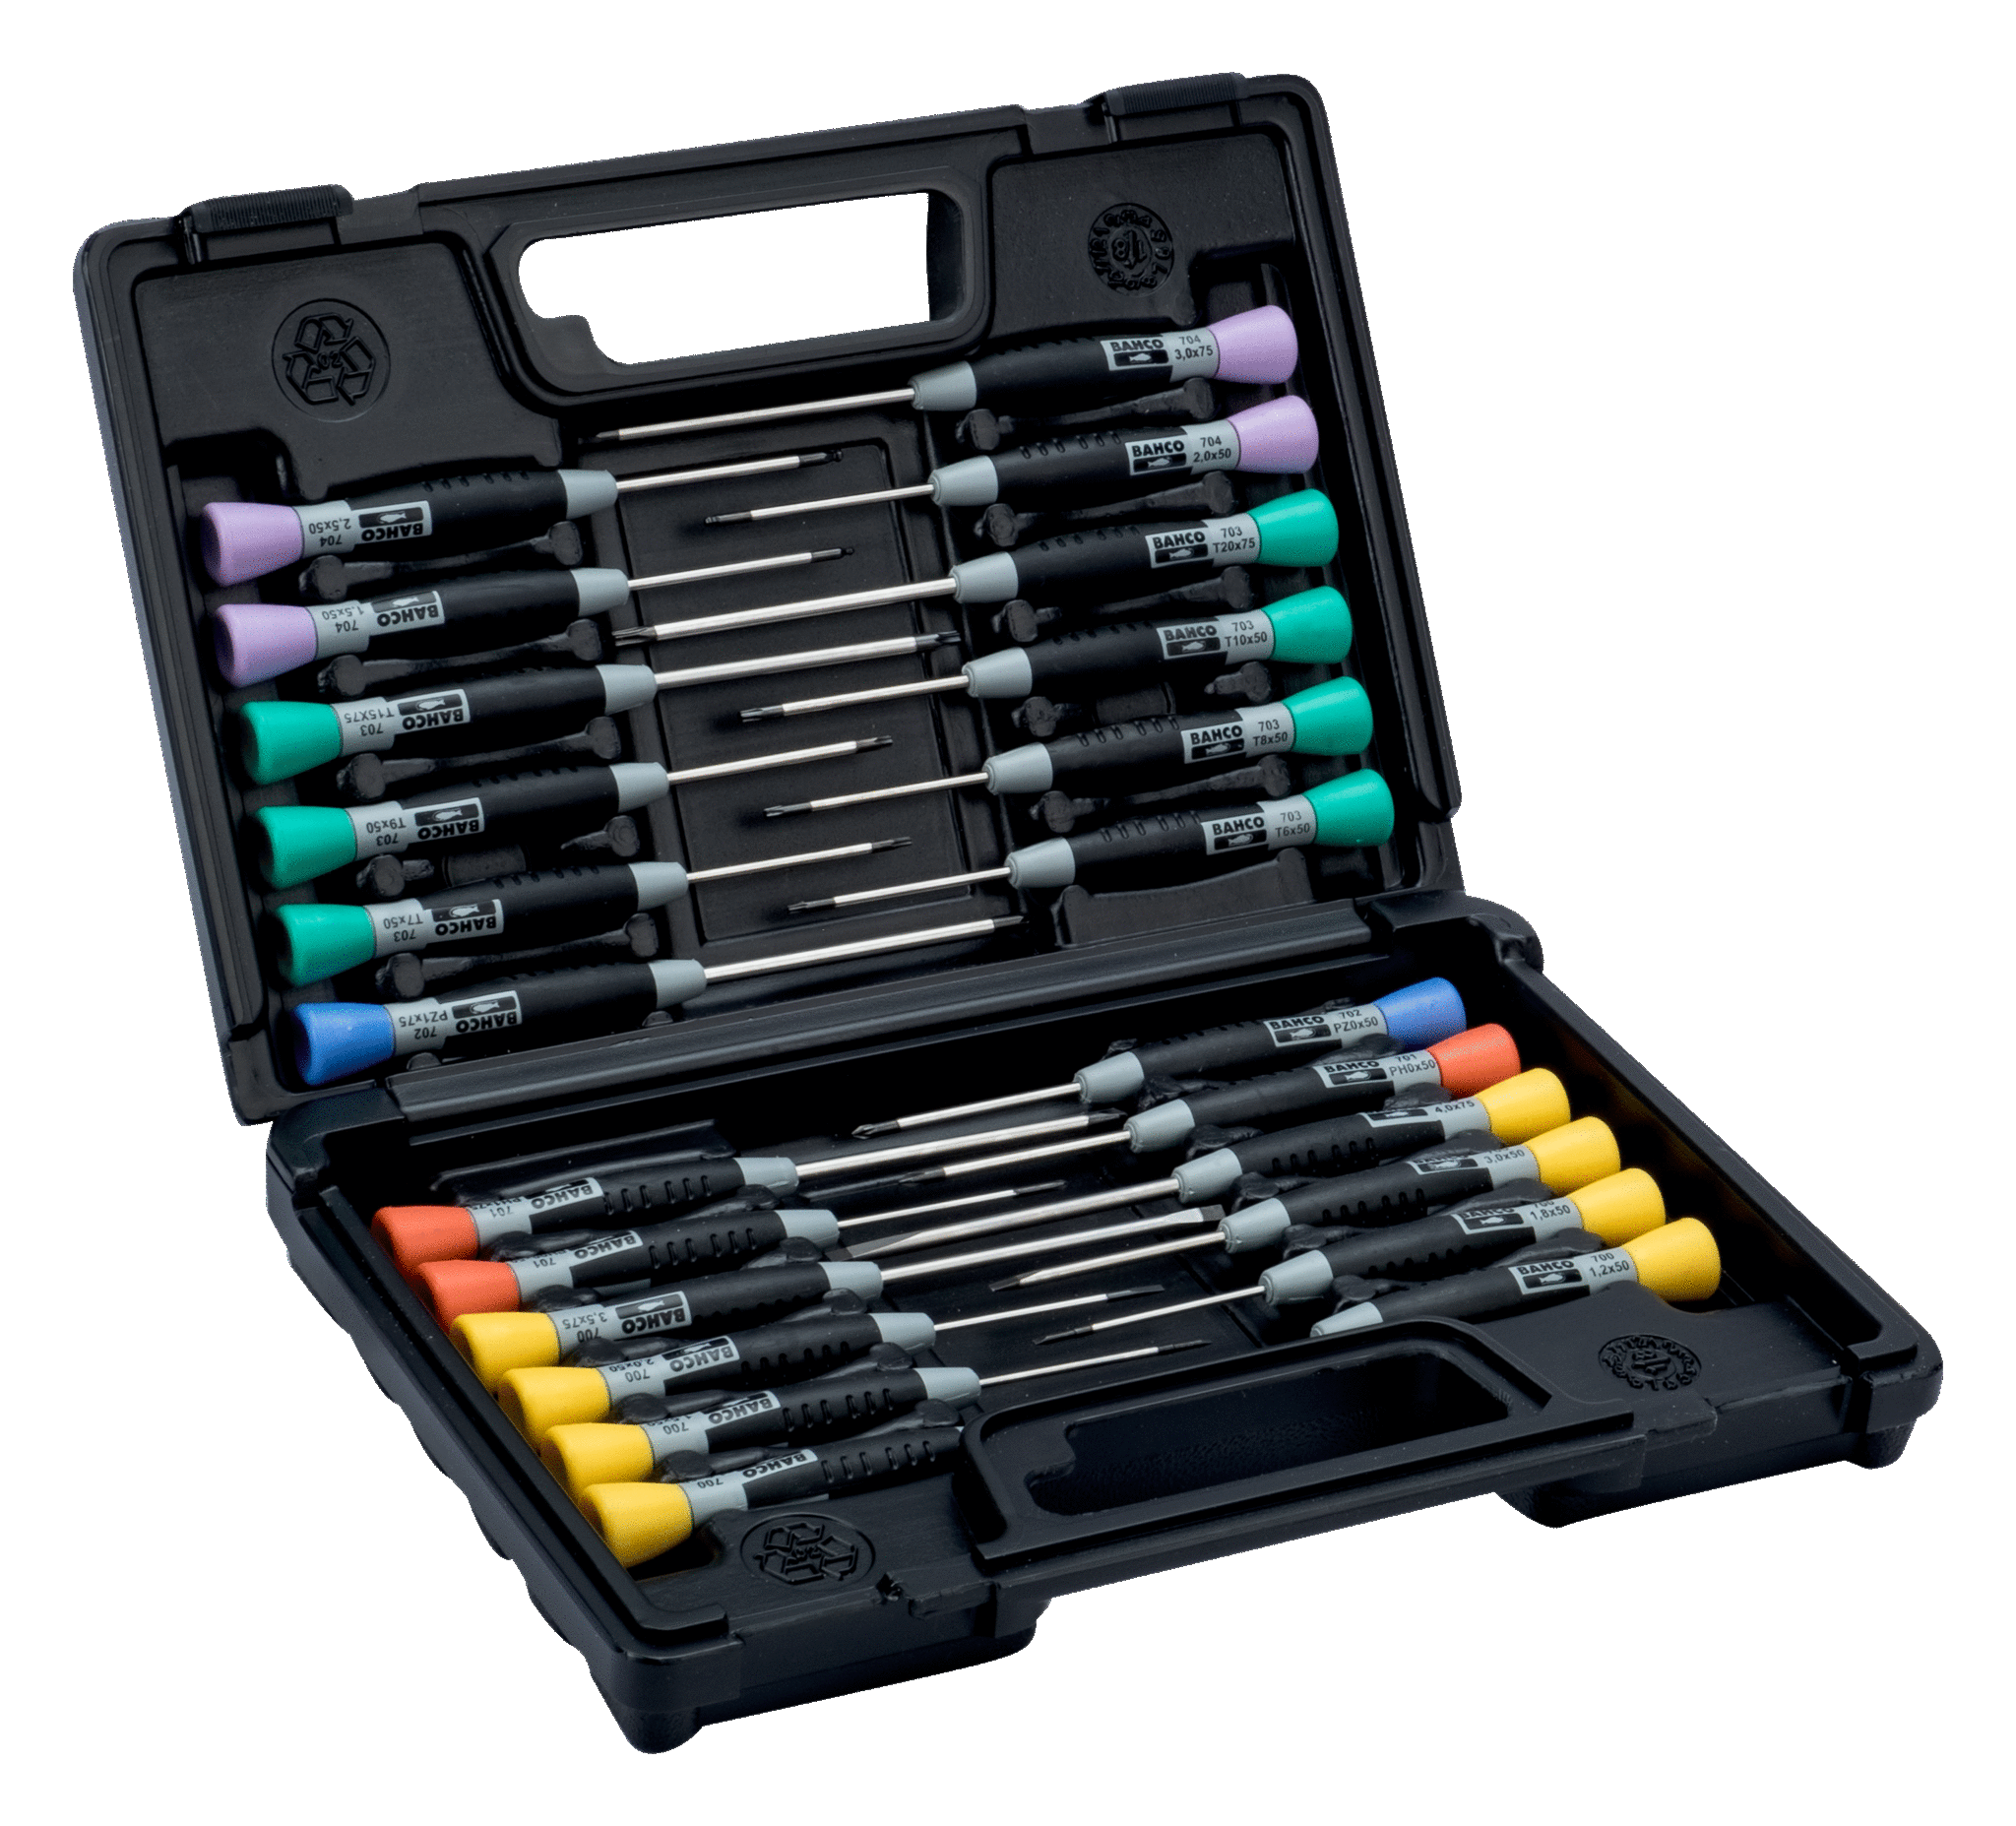 33-Piece Magnetic Screwdrivers Set Includes Slotted,Phillips Pozidriv Non-Slip Repair Tool Kit with Replaceable Screwdriver Bits for Repair Home Improvement Craft